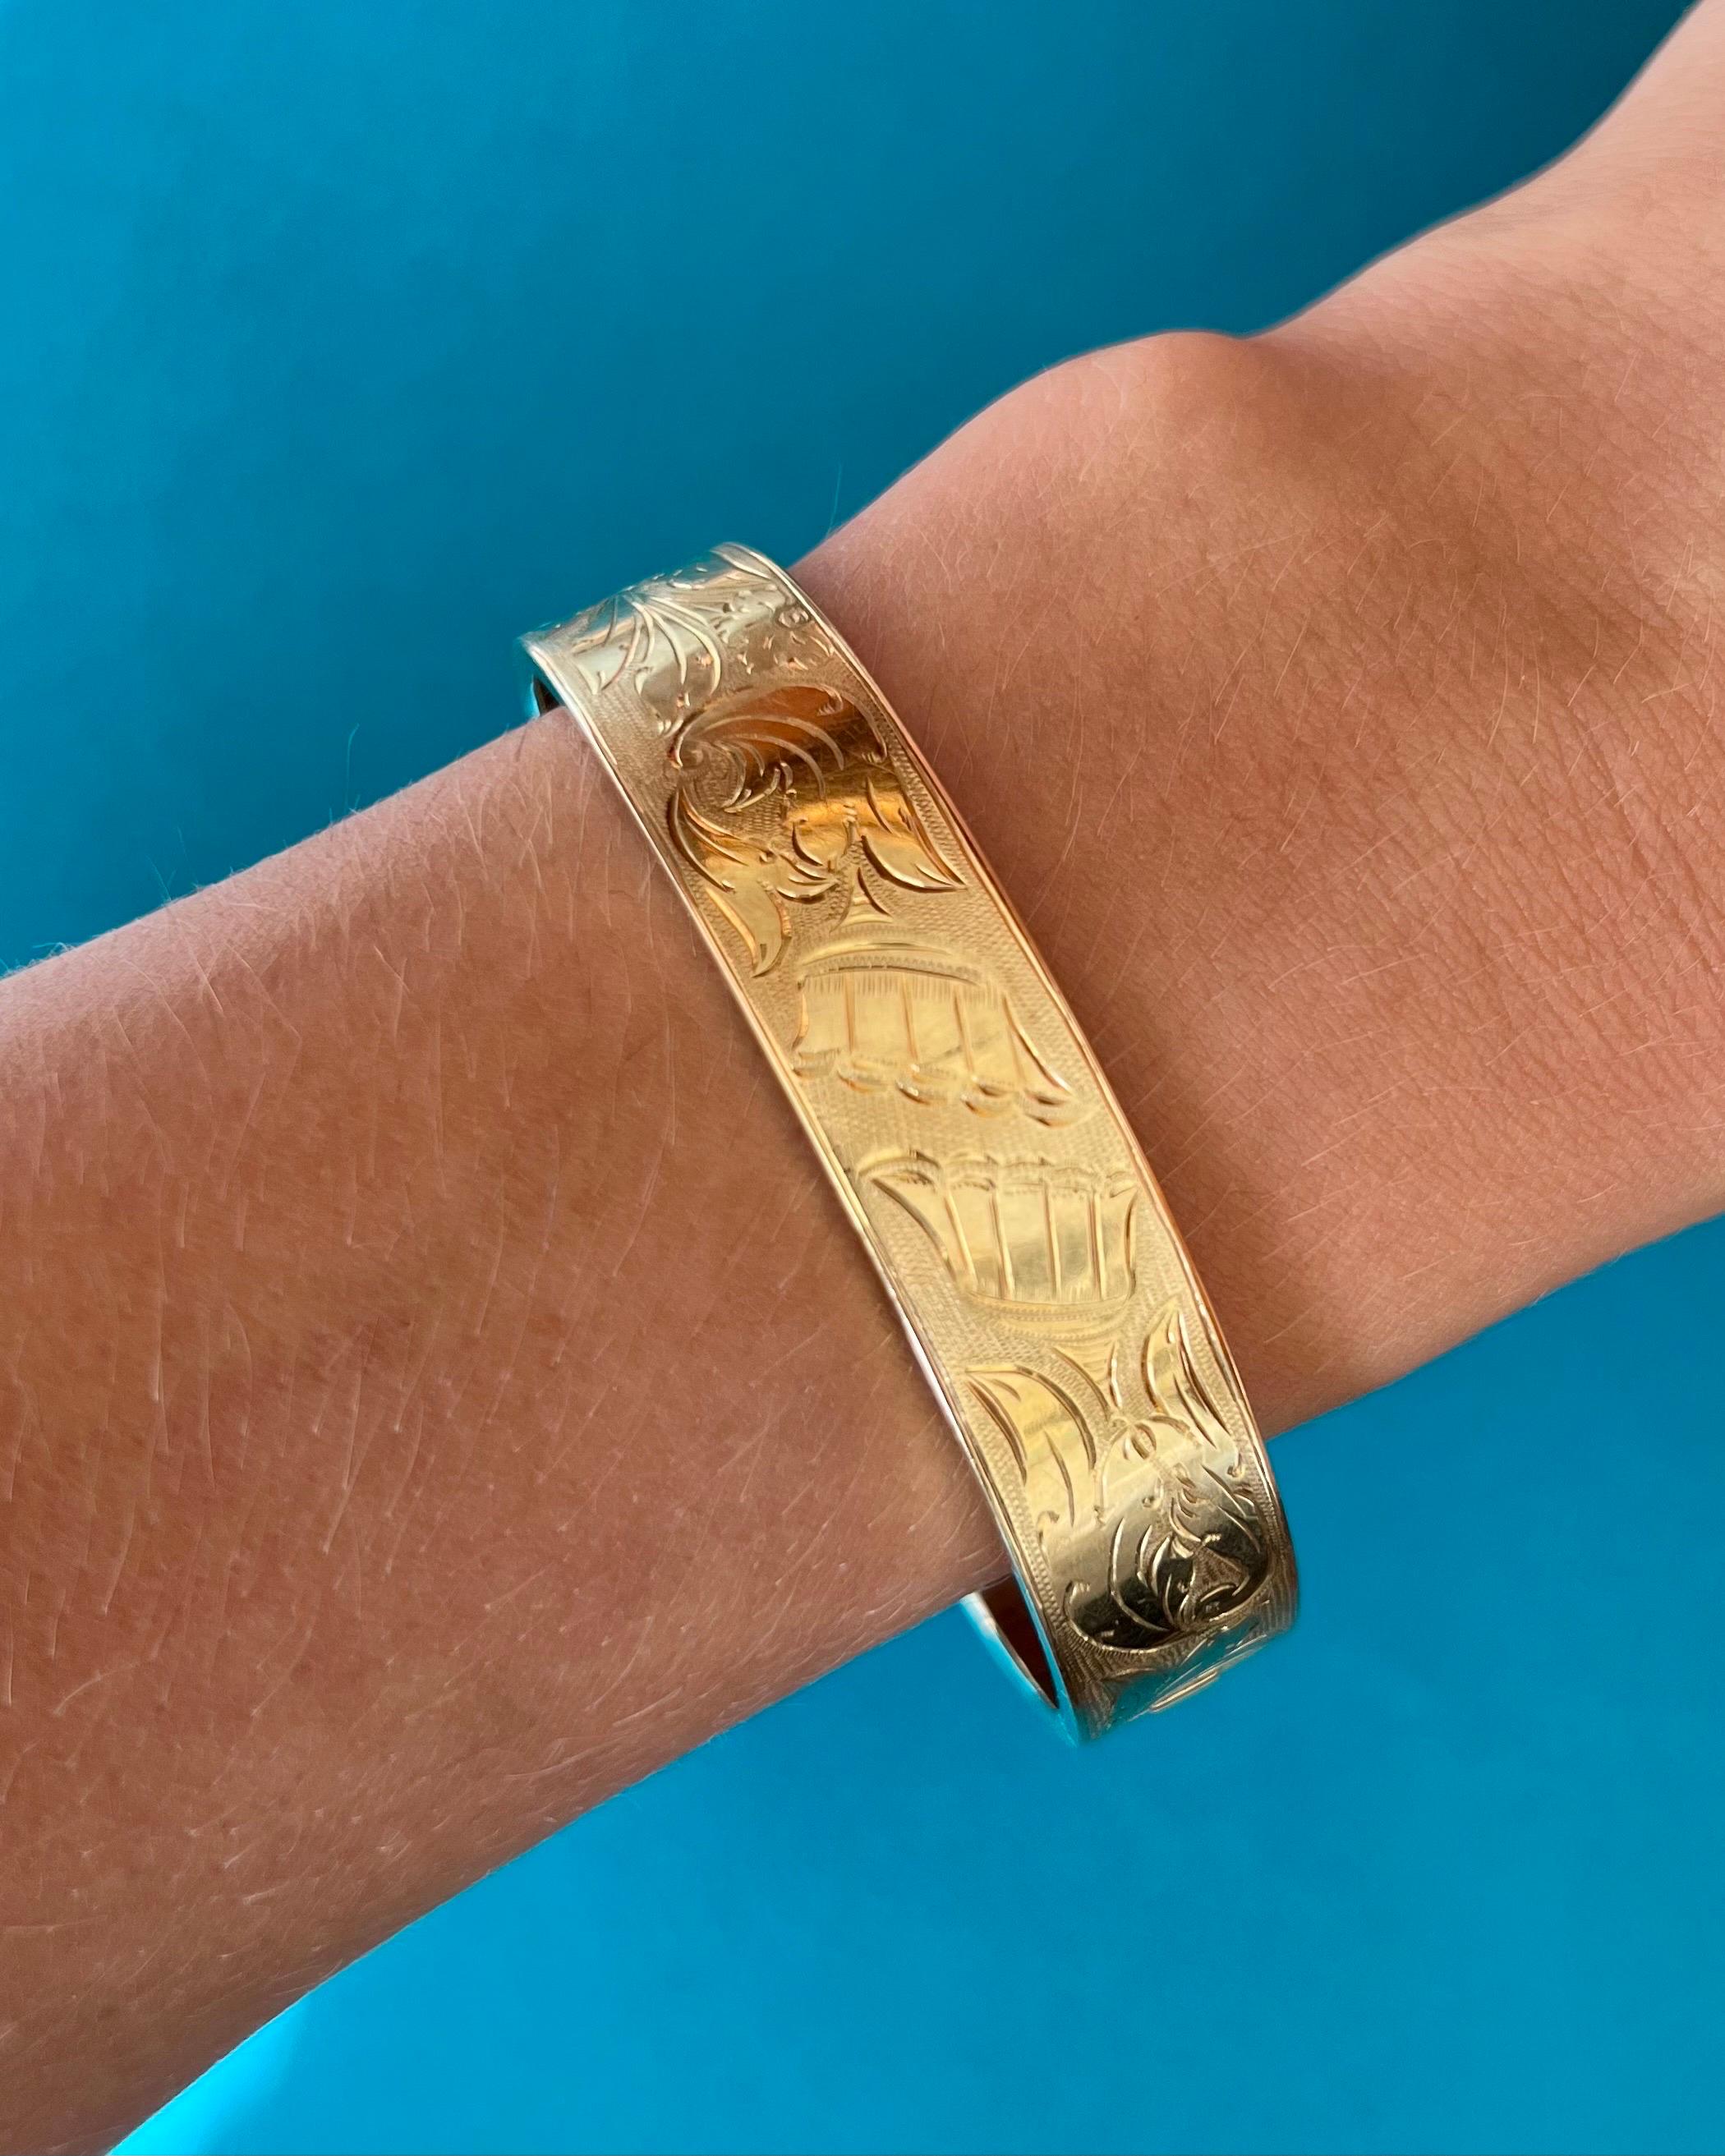 A beautiful 14 karat yellow gold bangle bracelet designed with nice floral engravings. The bracelet is detailed with scrolling leaves and a flower pattern, which covers the front of this bracelet and has a matted satin finish. The back side of the